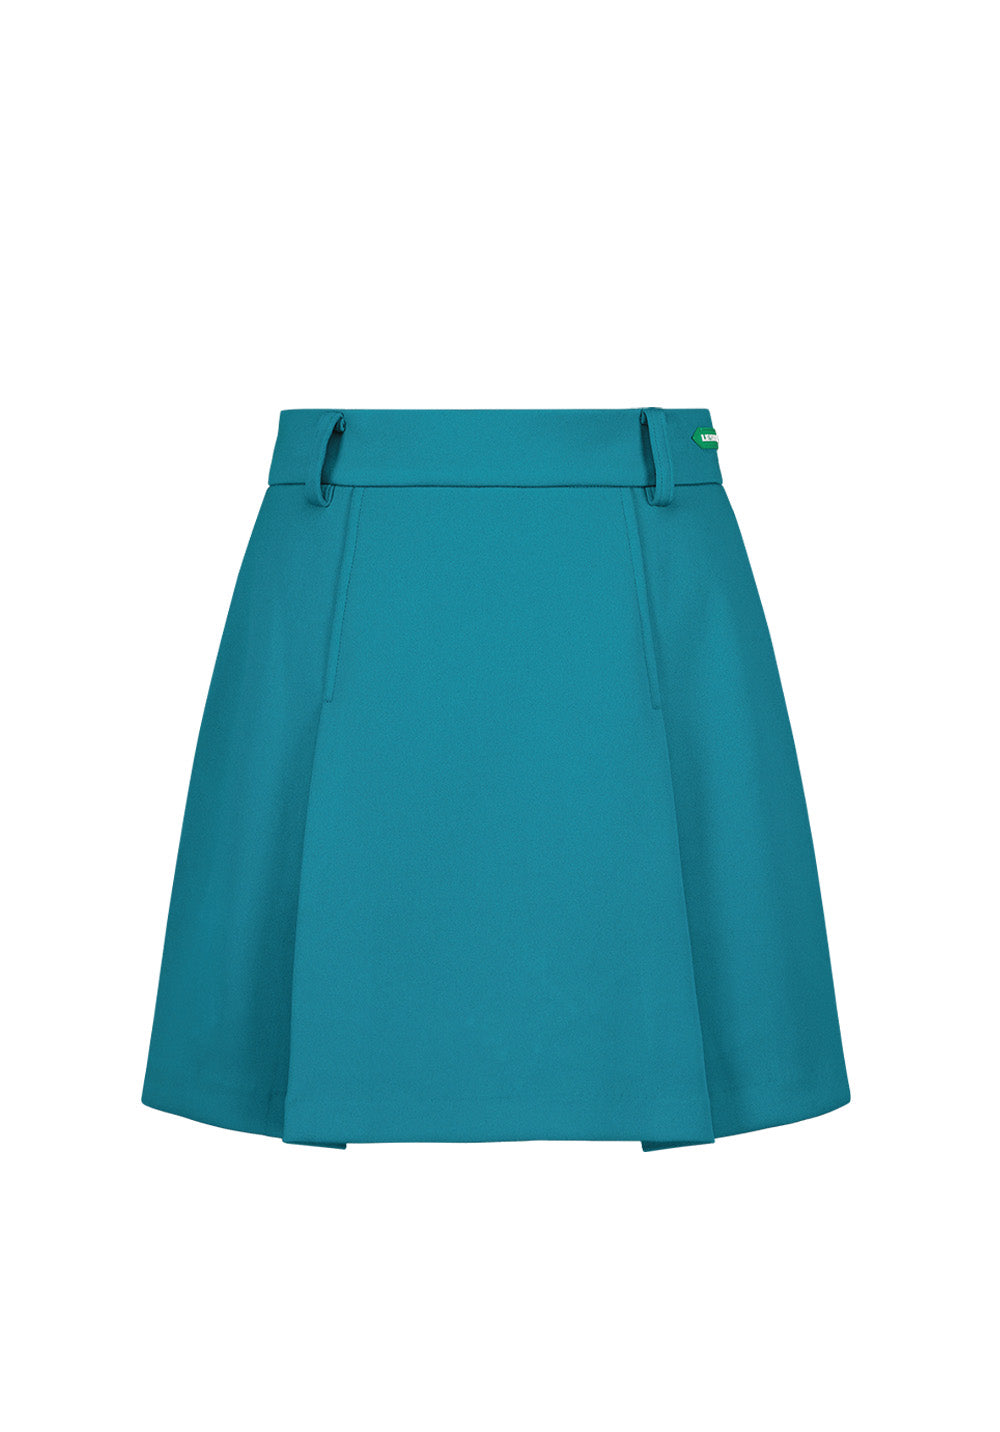 Lily Skirt - Peacock Green